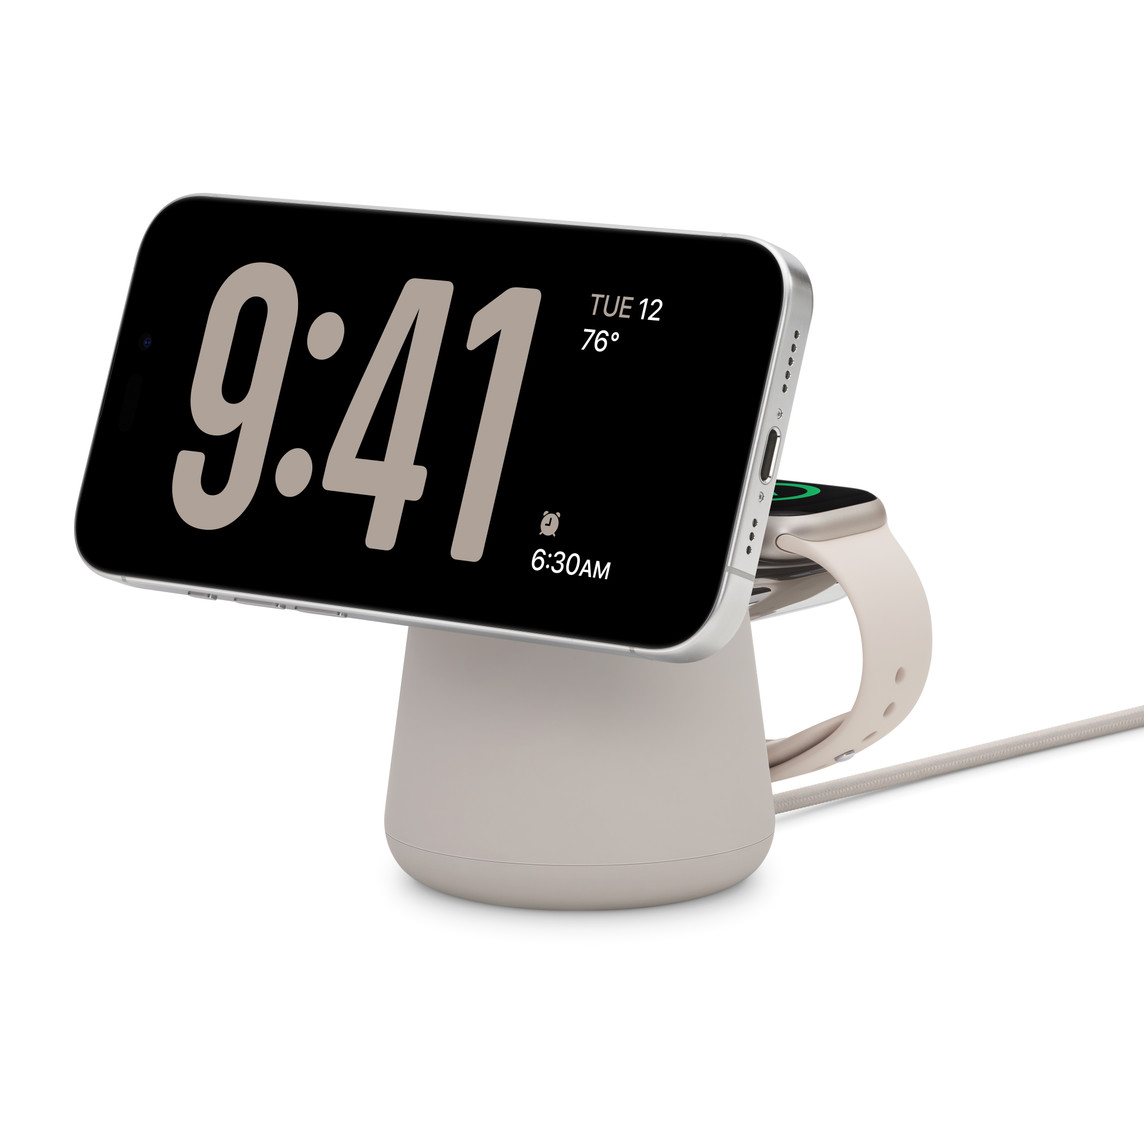 Belkin BOOST CHARGE PRO 2-in-1 Wireless Charging Dock with MagSafe, iPhone charging in landscape position, Apple Watch behind it also charging, USB-C charging cable at bottom